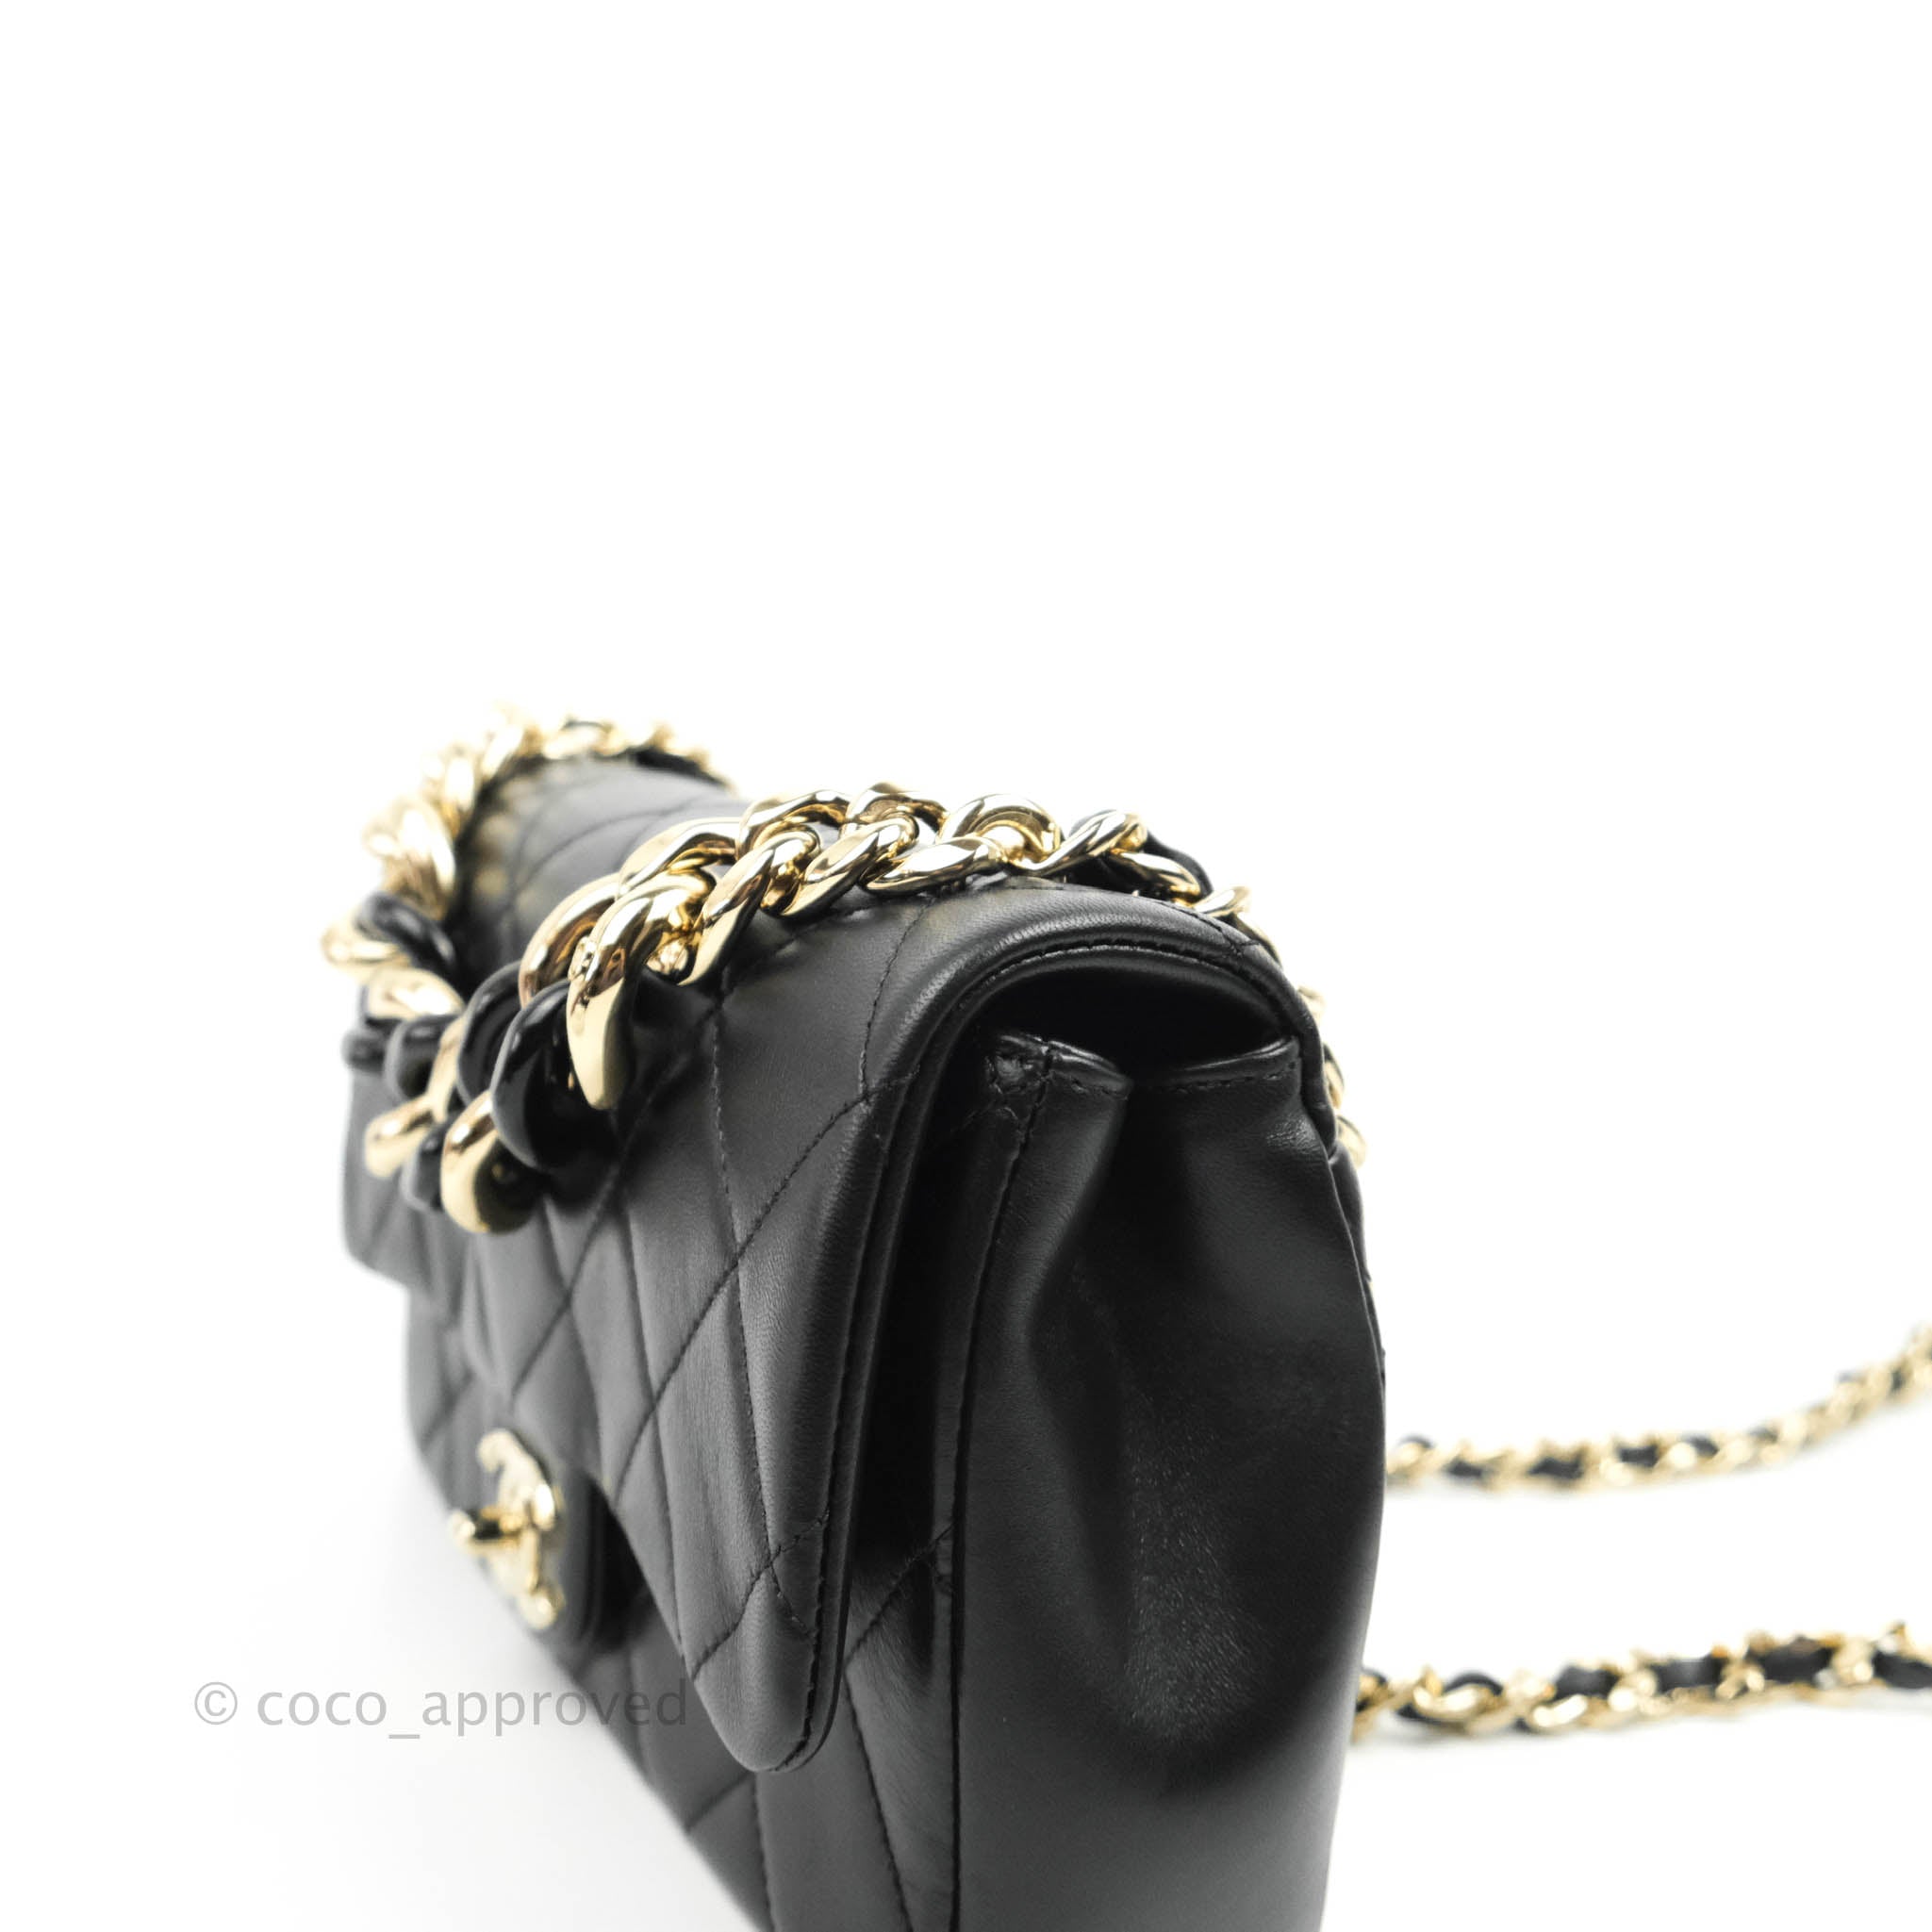 Chanel Quilted Large Resin Bi-Color Chain Flap Bag Black Lambskin